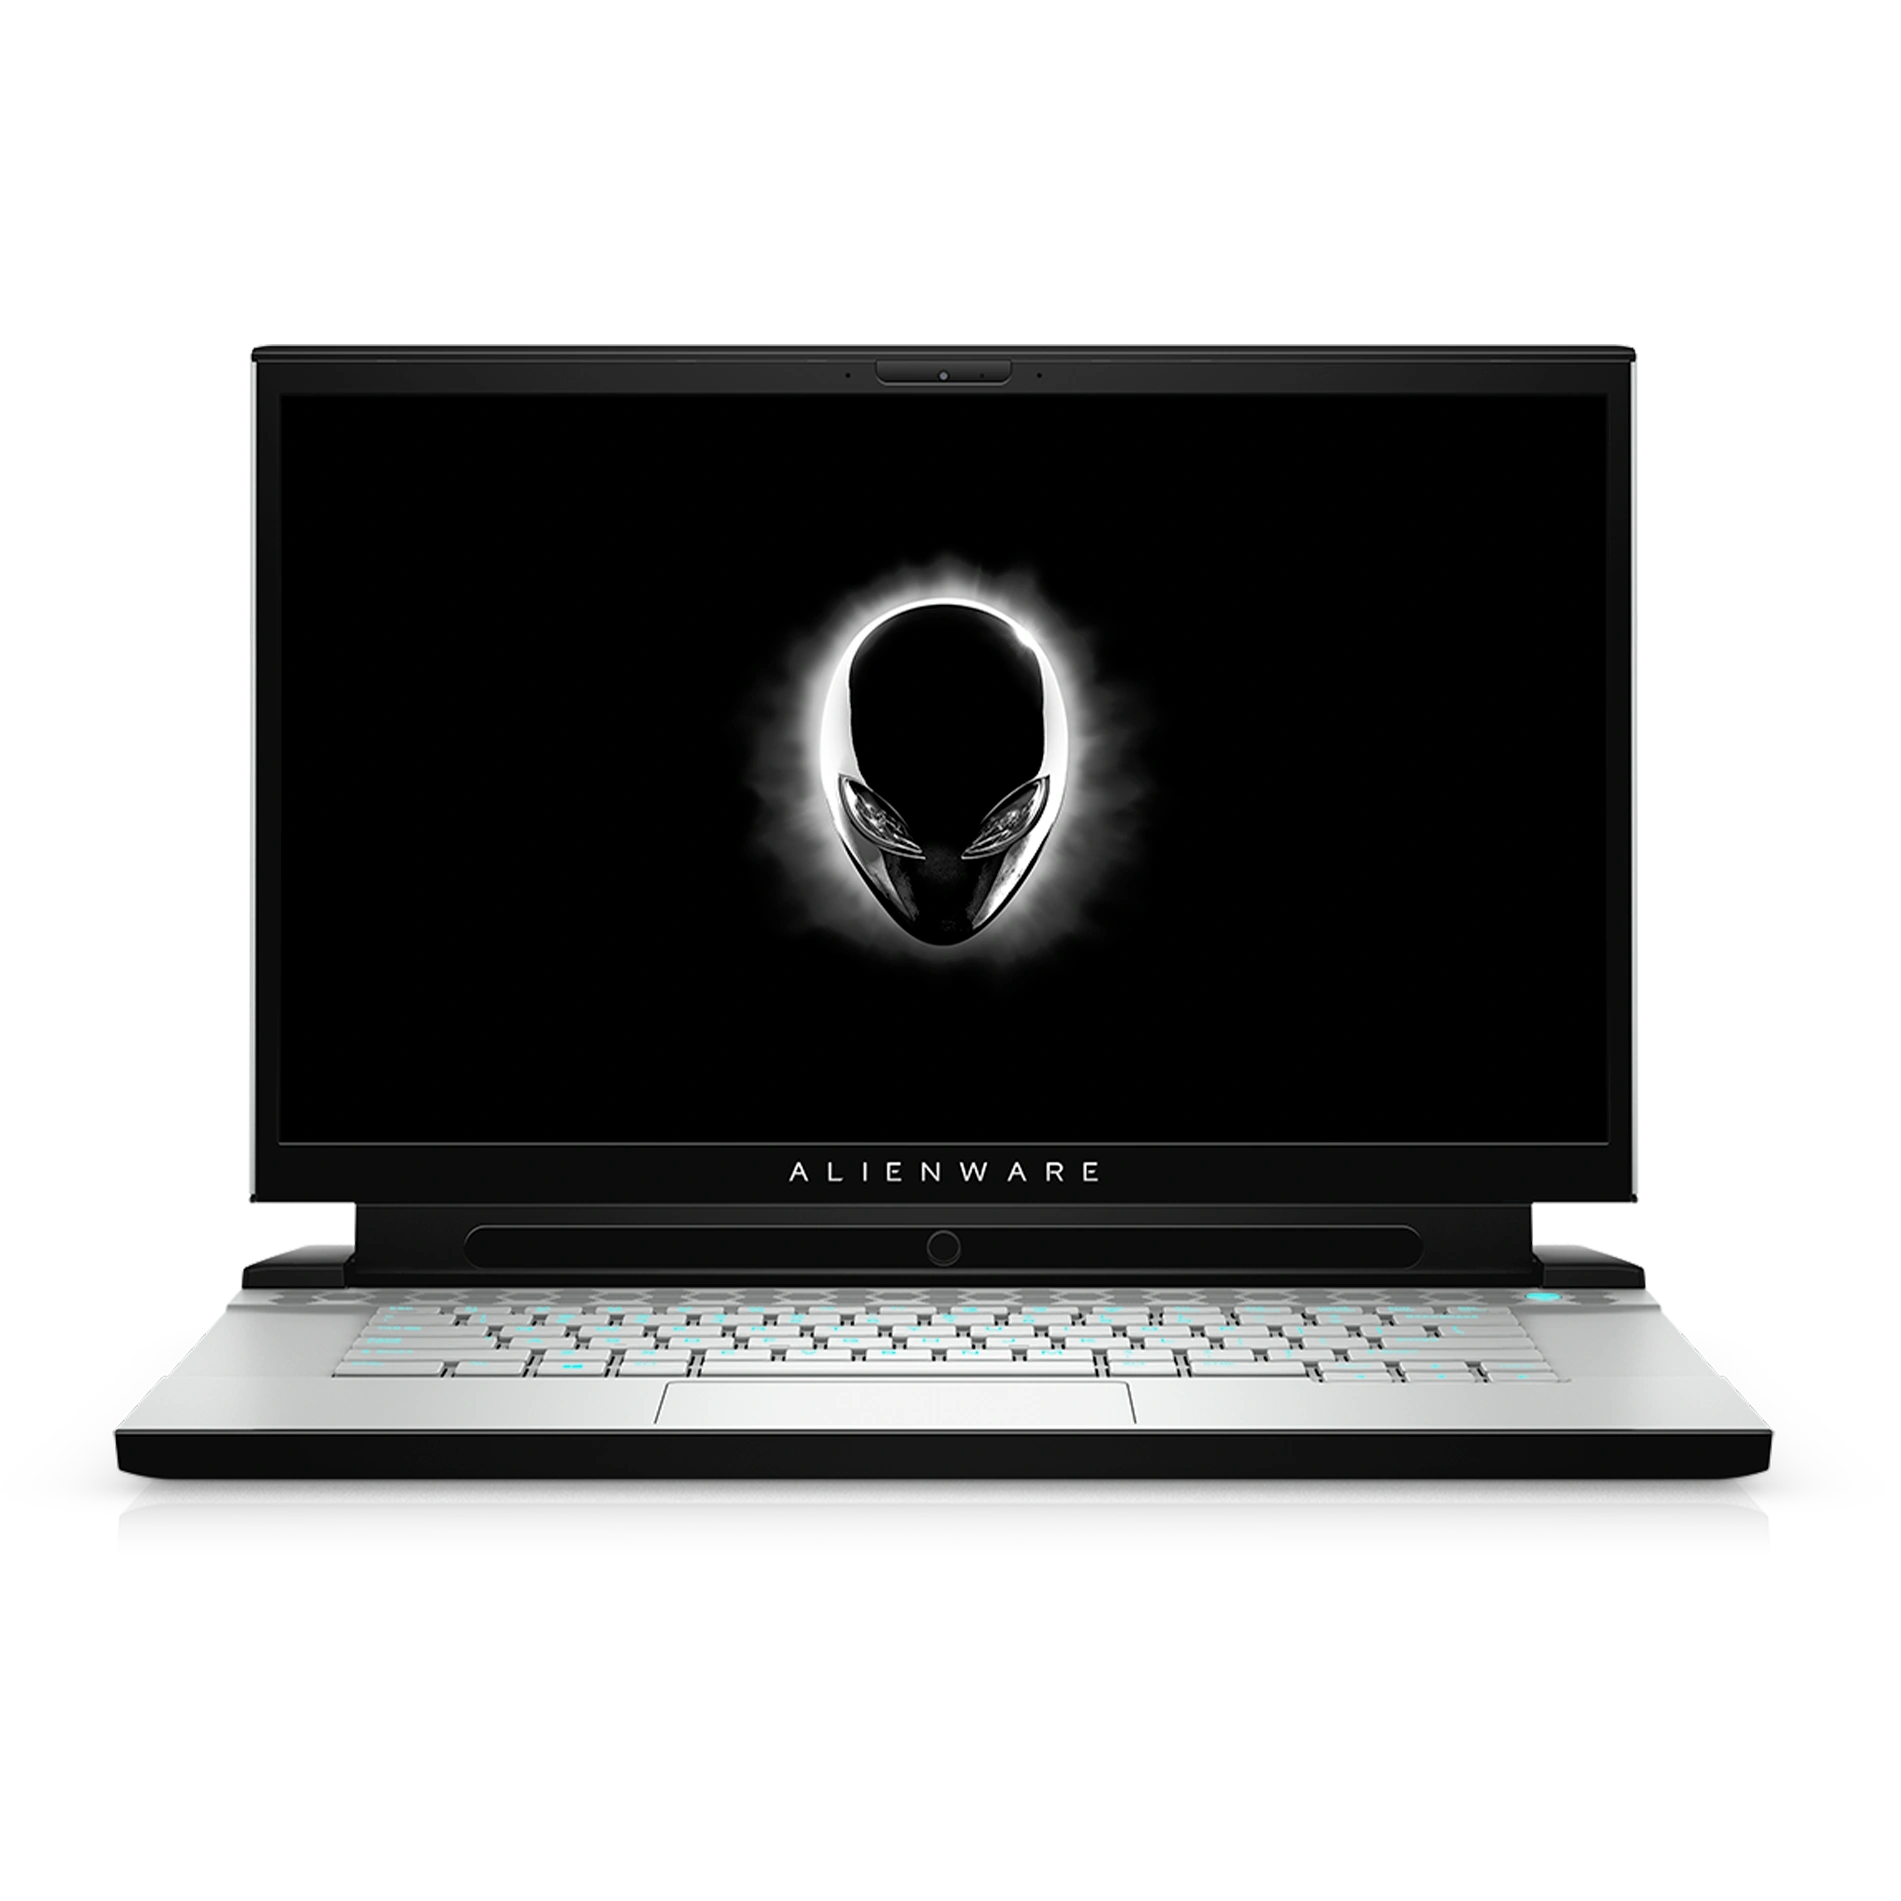 Alienware m15 VR Ready Laptop with alien logo on the screen